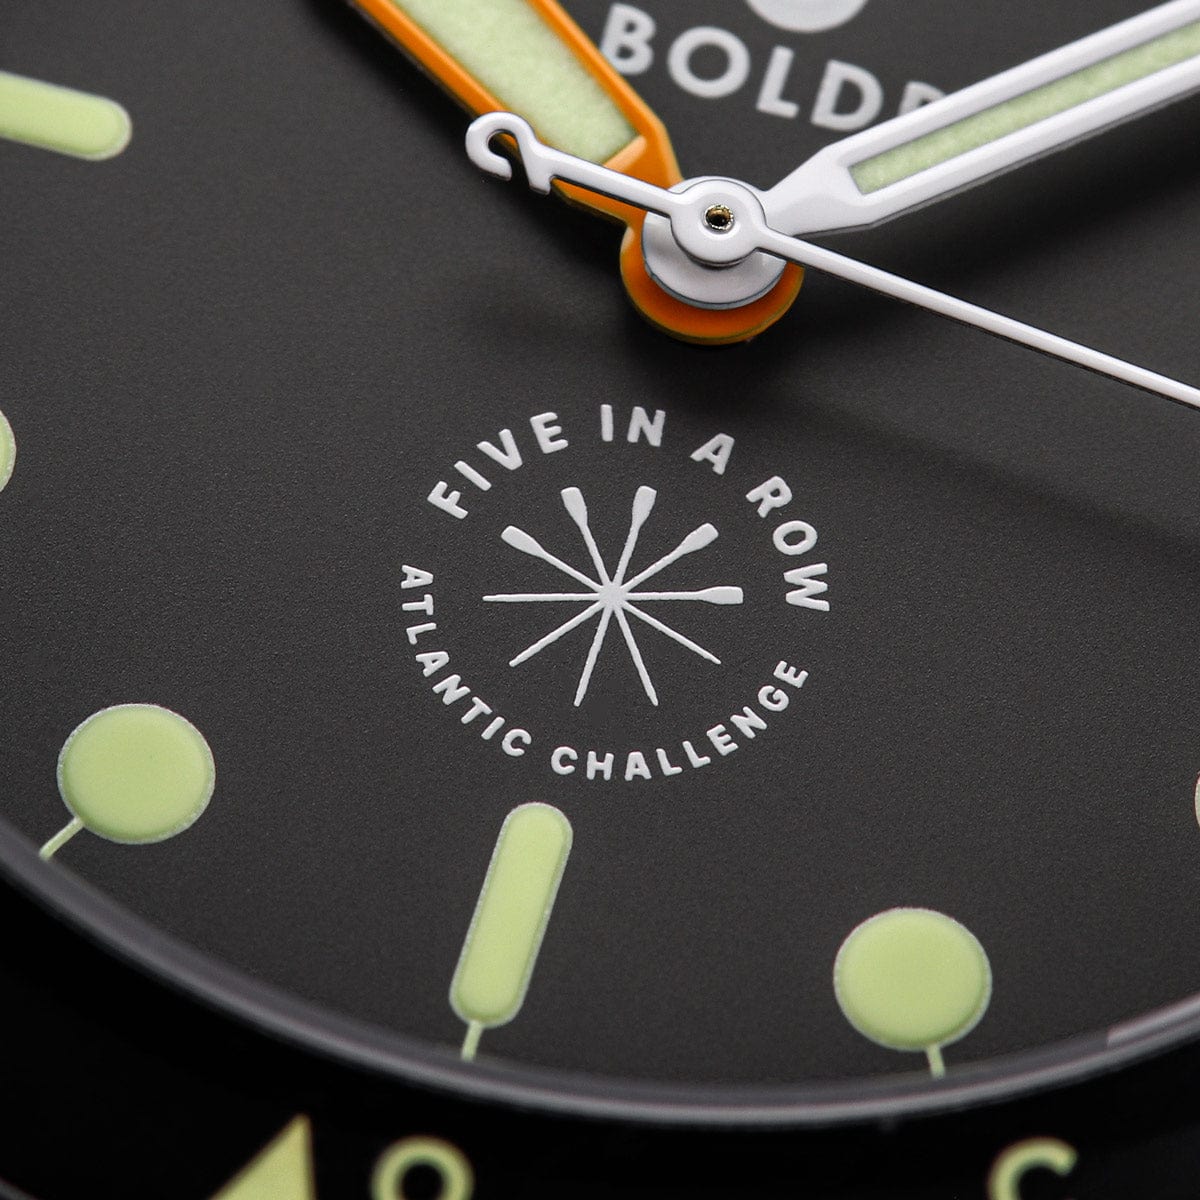 Boldr Venture Five In A Row II - NEARLY NEW